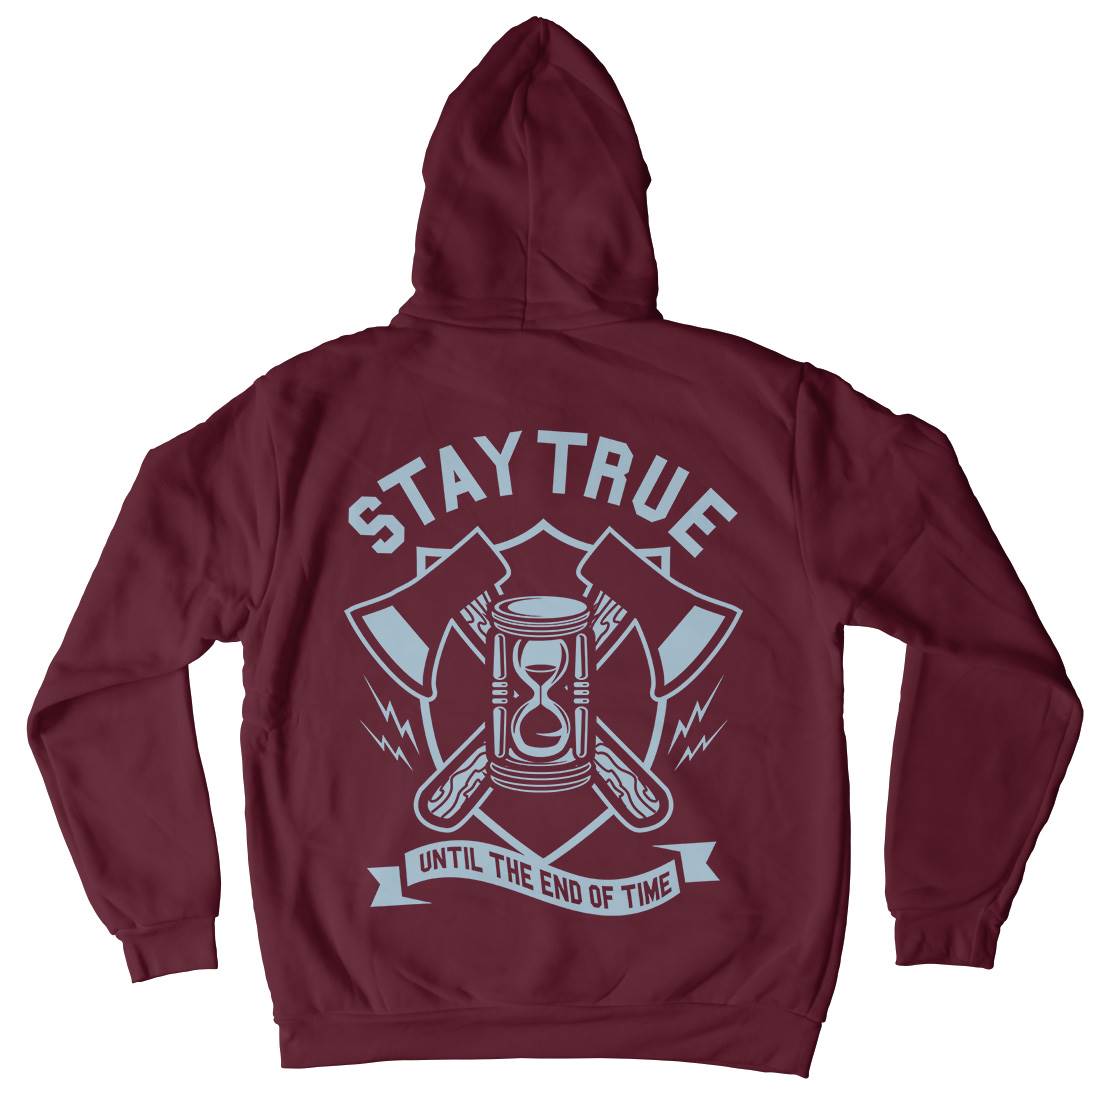 Stay True Kids Crew Neck Hoodie Quotes A285